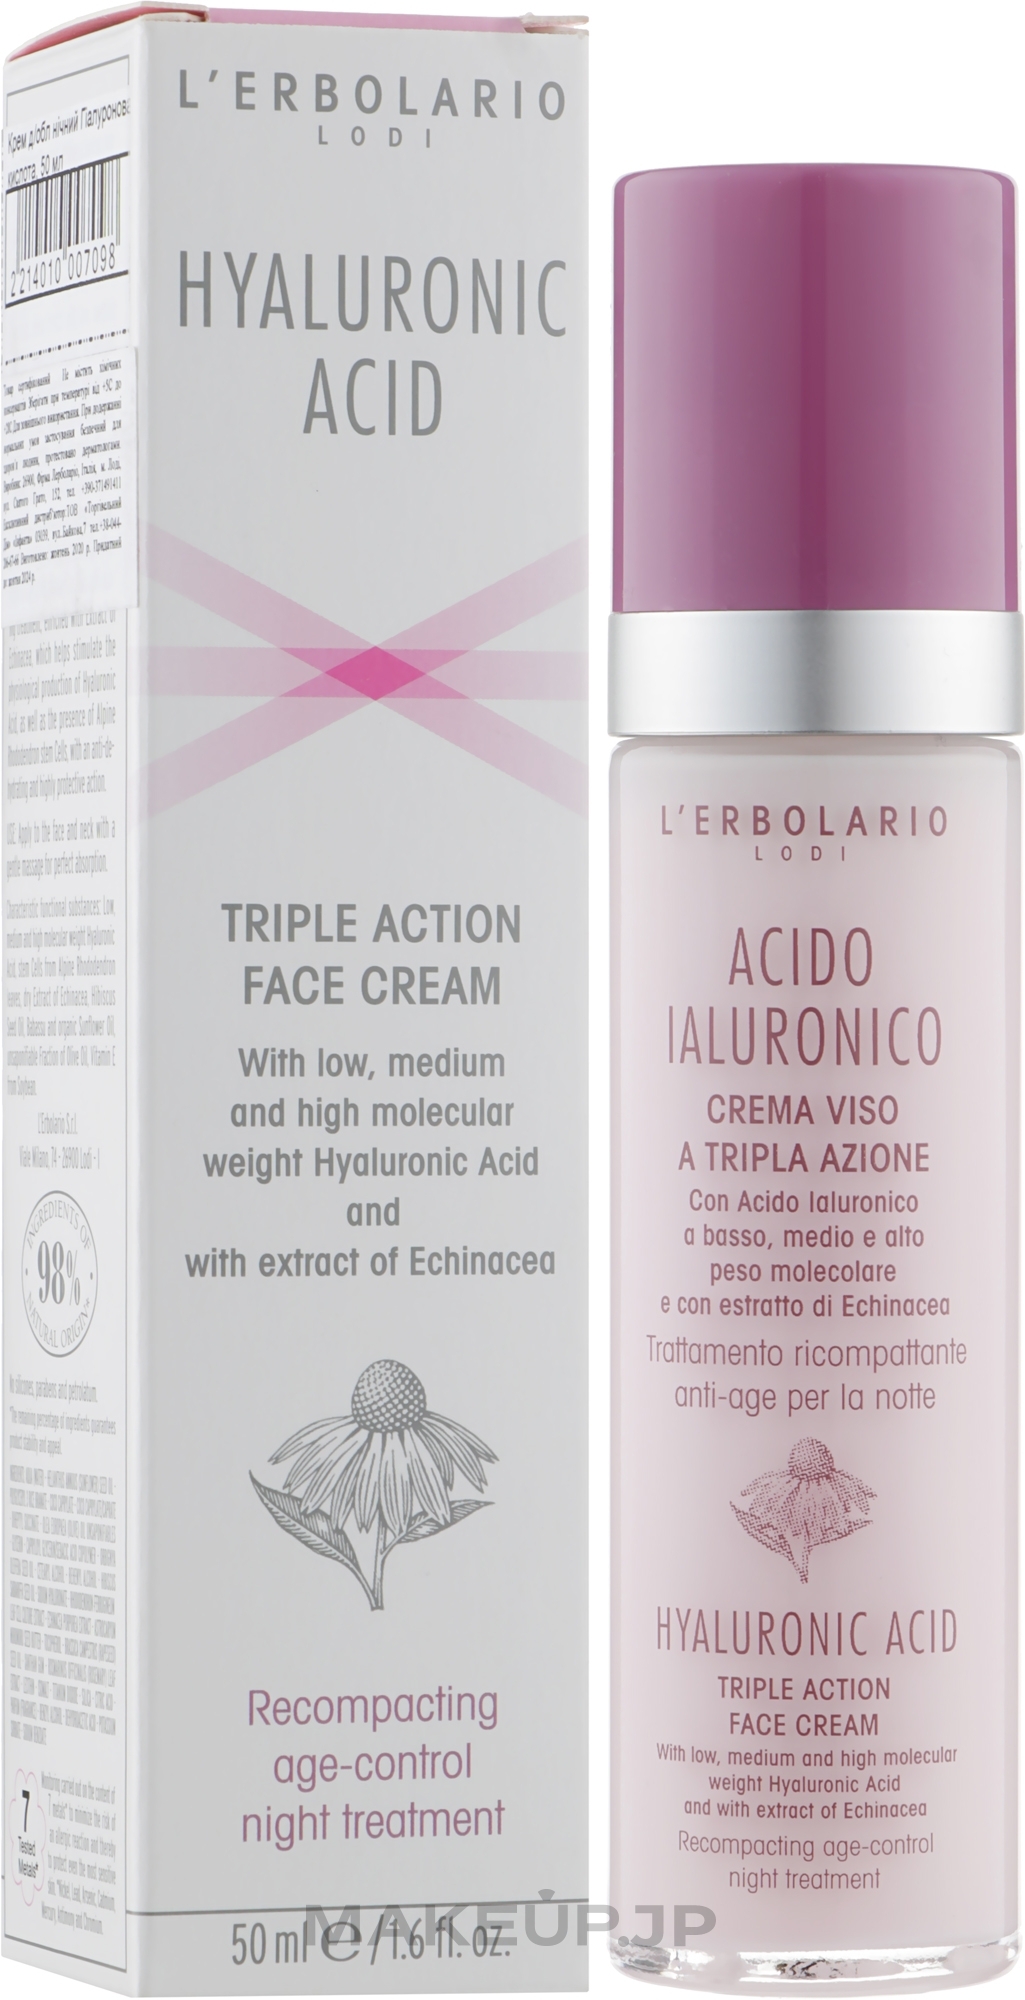 Night Face Cream with Hyaluronic Acid - L'Erbolario Acido Ialuronico Hyaluronic Acid Triple Action Face Cream — photo 50 ml